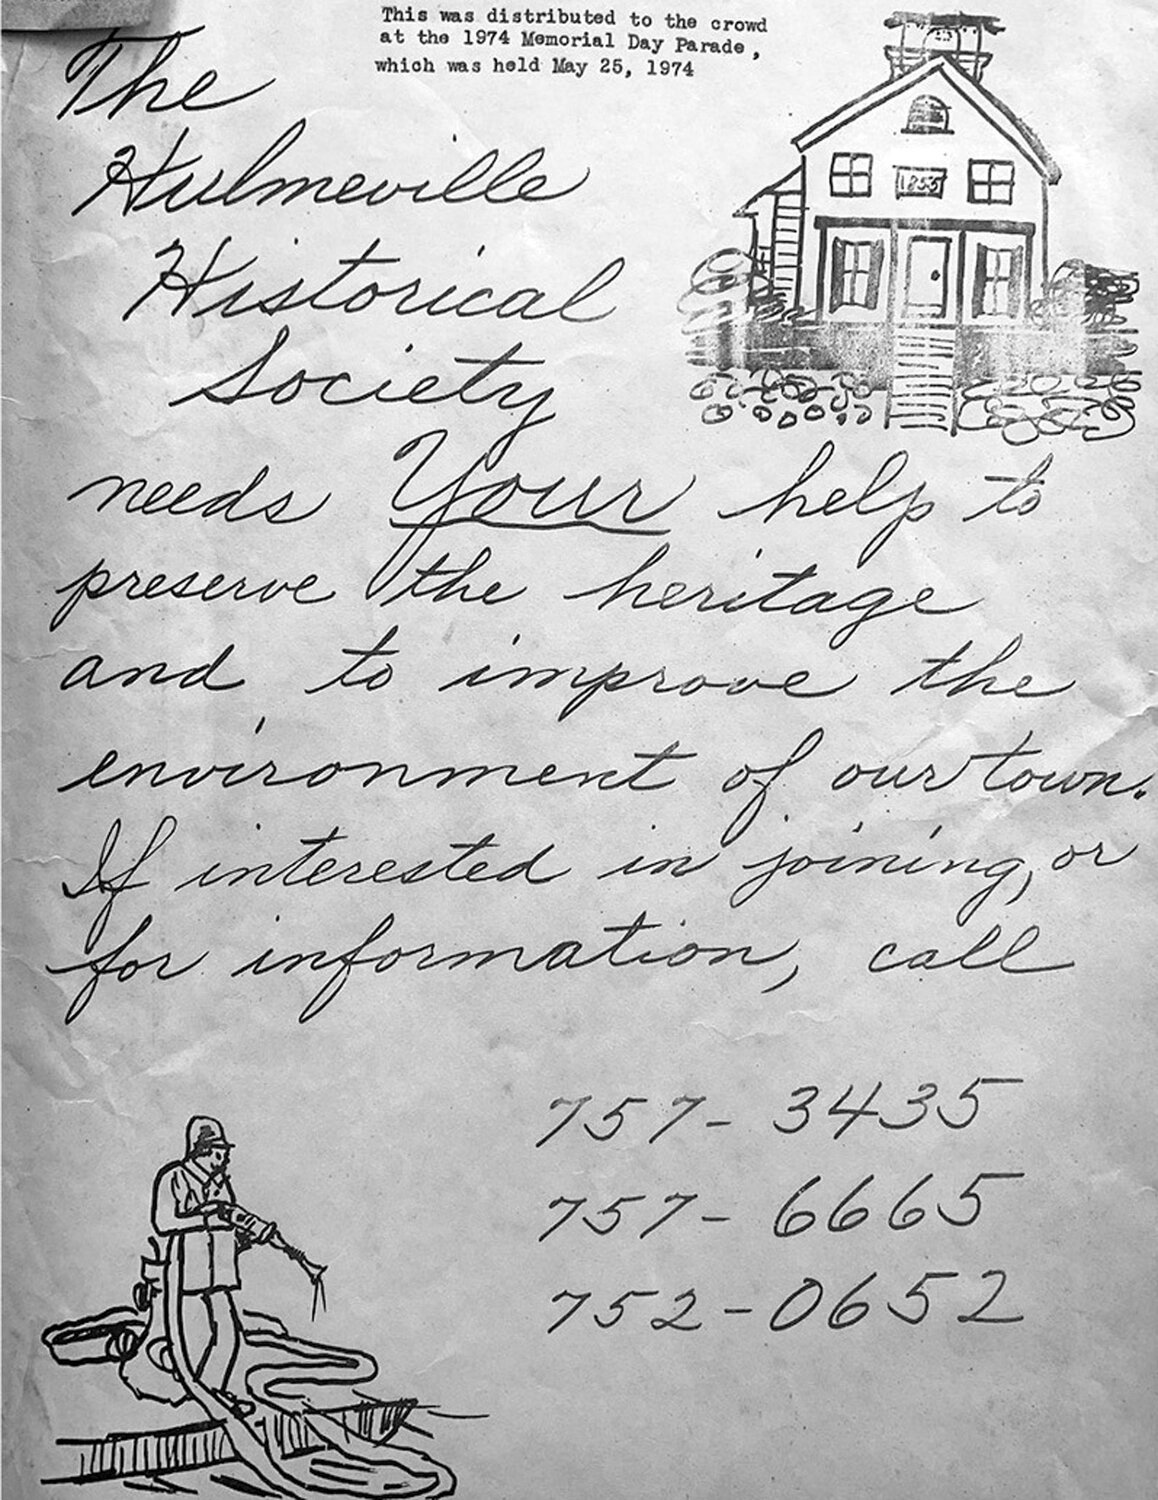 This first flyer, circulated in 1974, was aimed at recruiting historical society members. The Hulmeville Historical Society was formed 50 years ago this month.